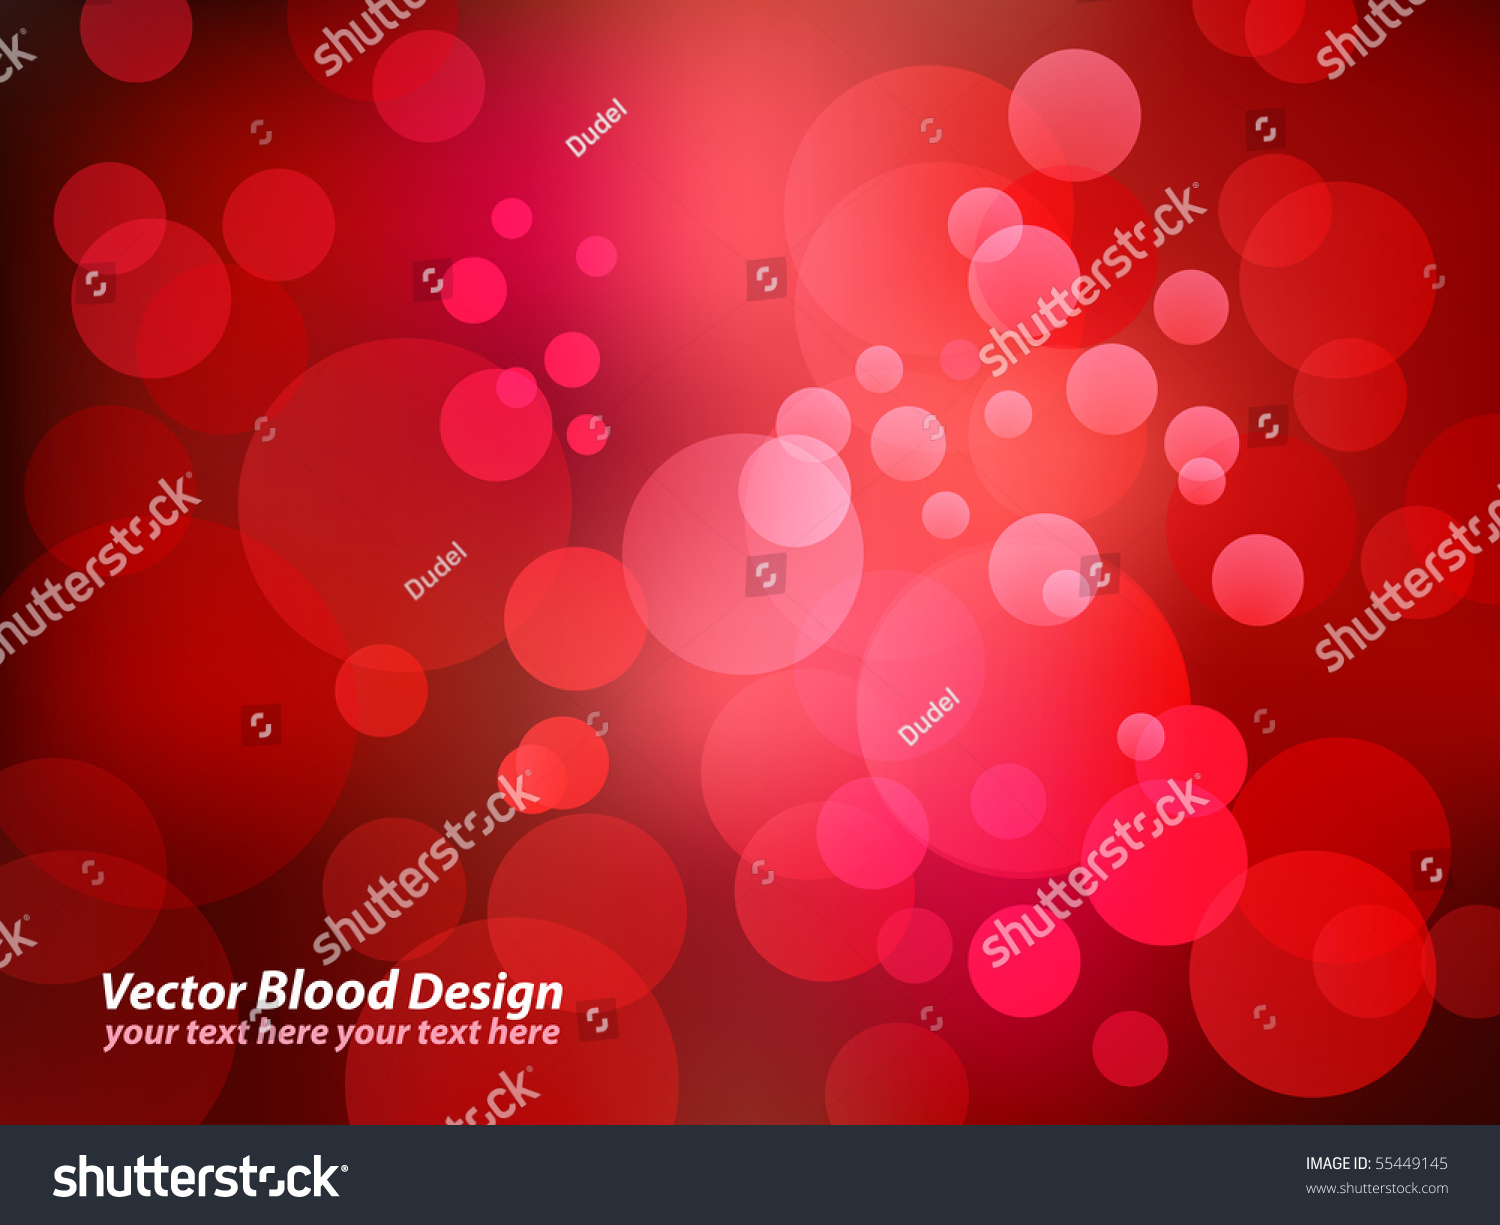 Red Abstract Background Stock Vector 55449145 : Shutterstock